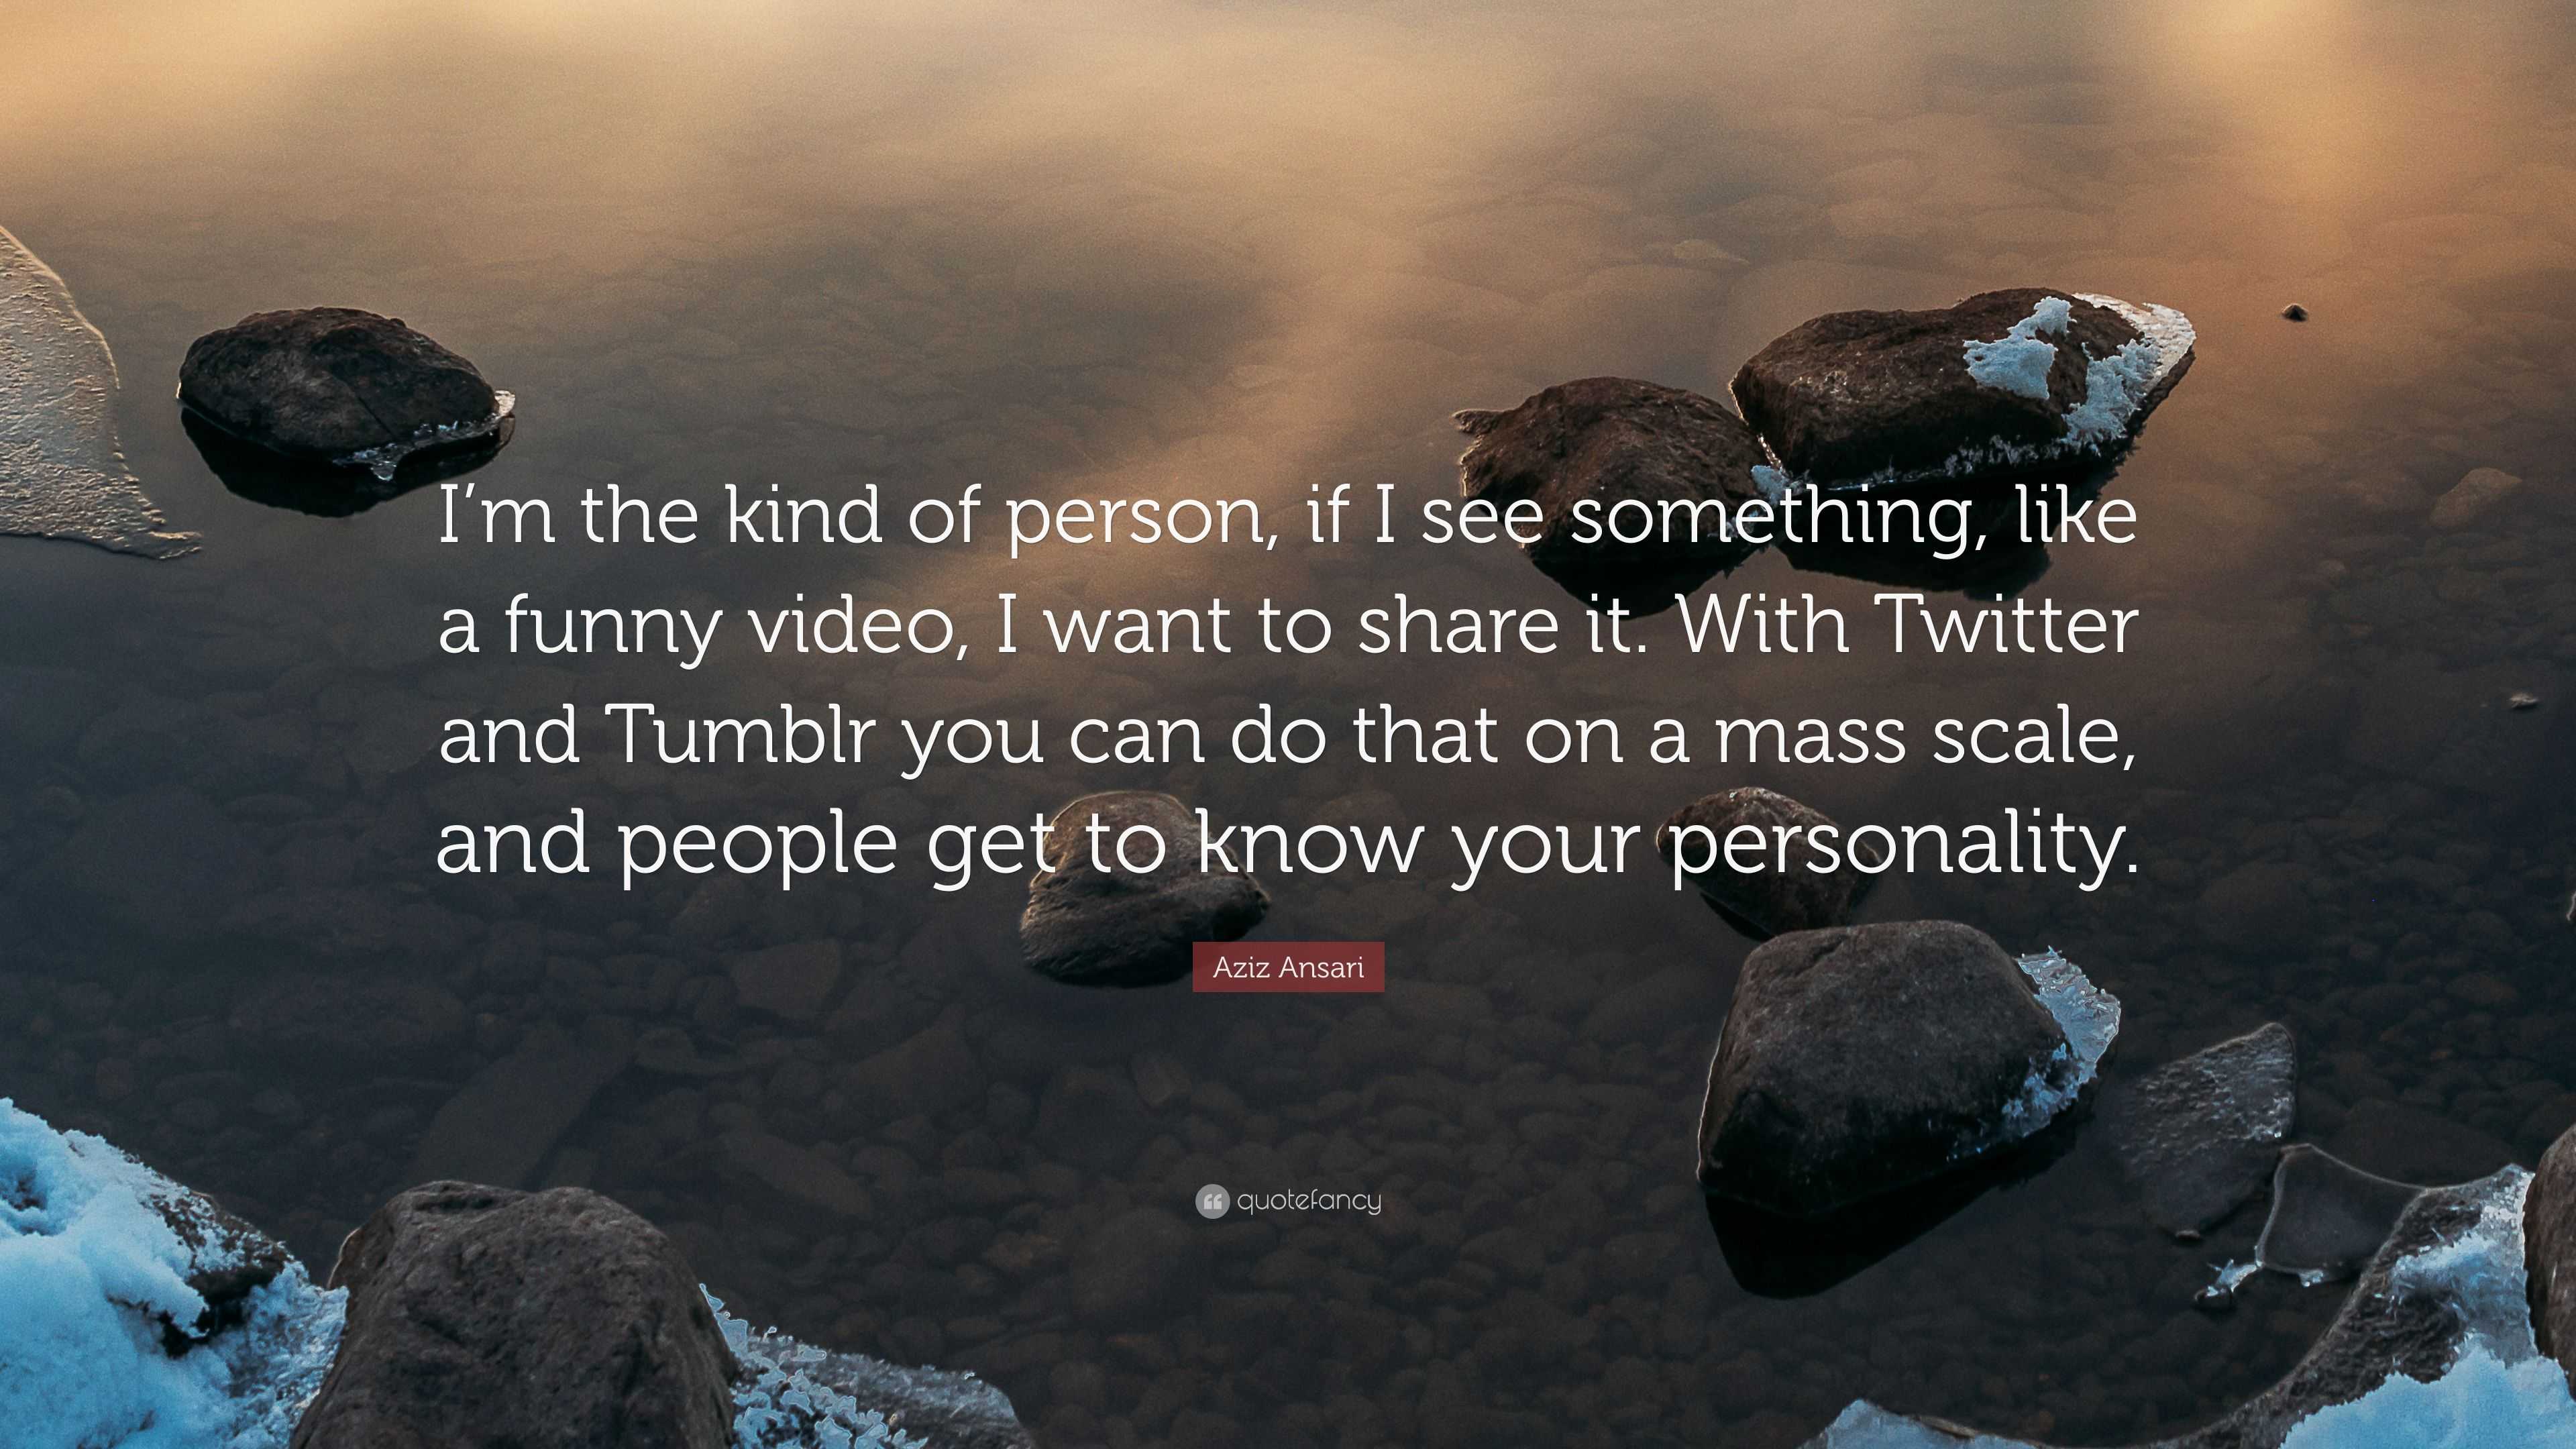 Aziz Ansari Quote: “I'm the kind of person, if I see something, like a funny  video, I want to share it. With Twitter and Tumblr you can do t...”